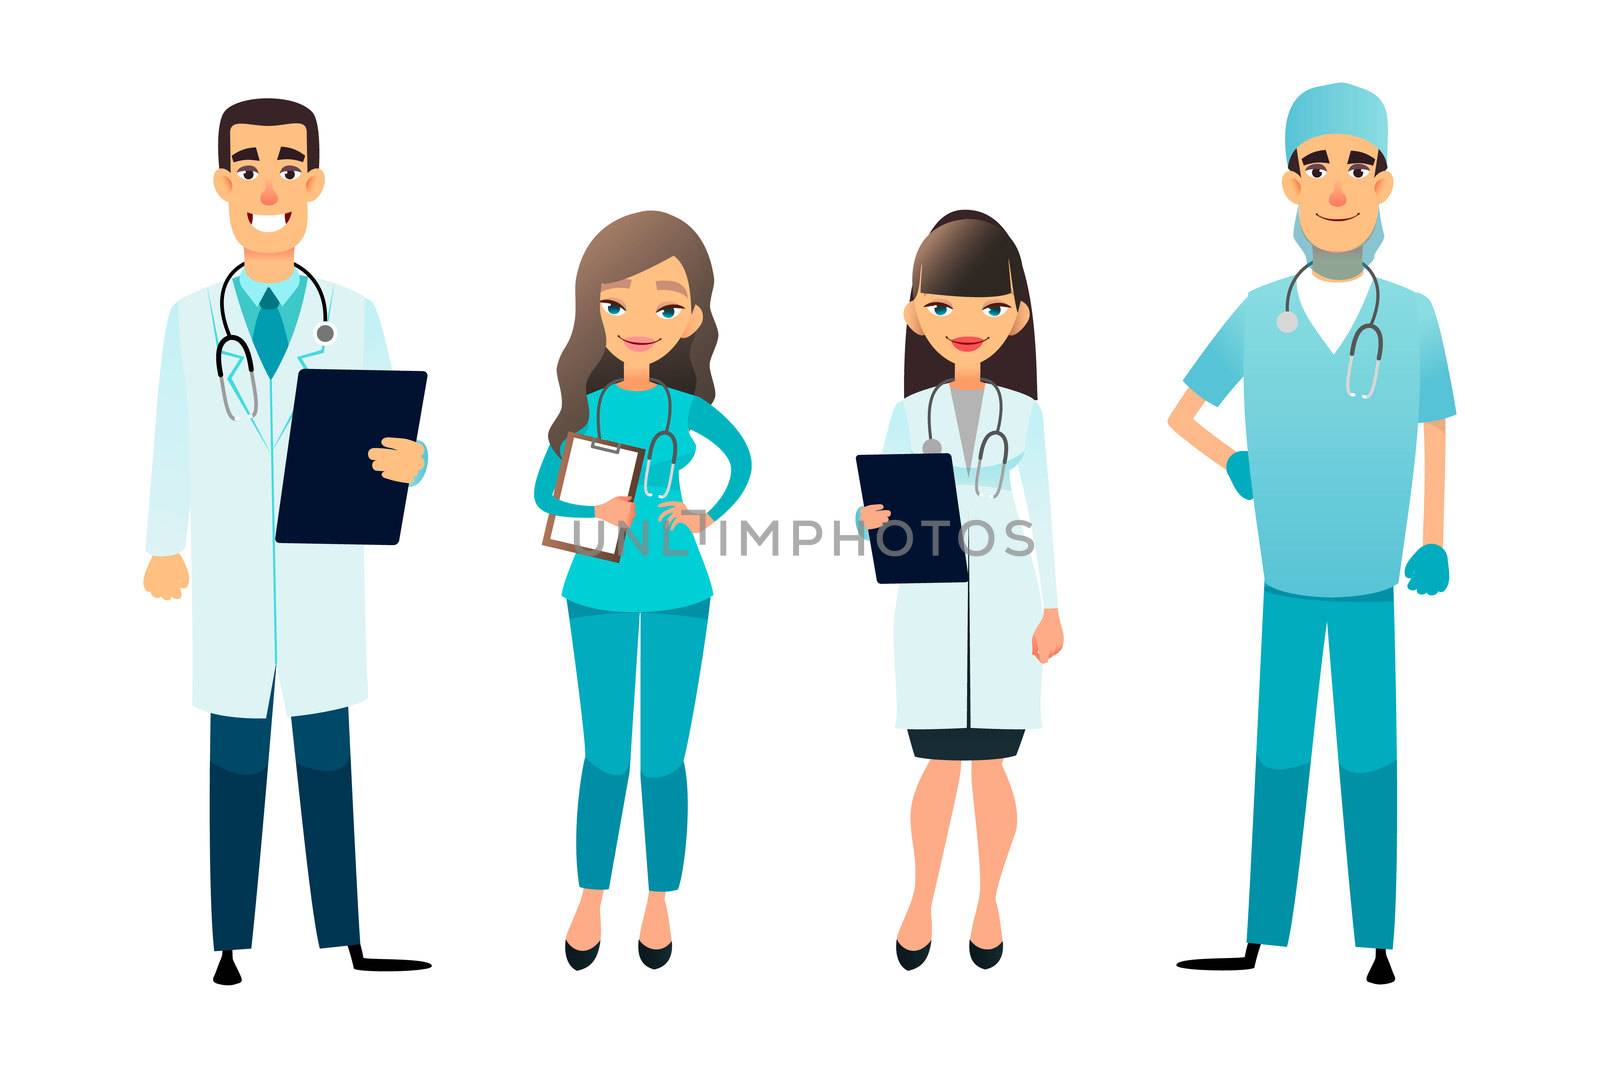 Doctors and nurses team. Cartoon medical staff. Medical team concept. Surgeon, nurse and therapist on hospital. Professional health workers. by Elena_Garder